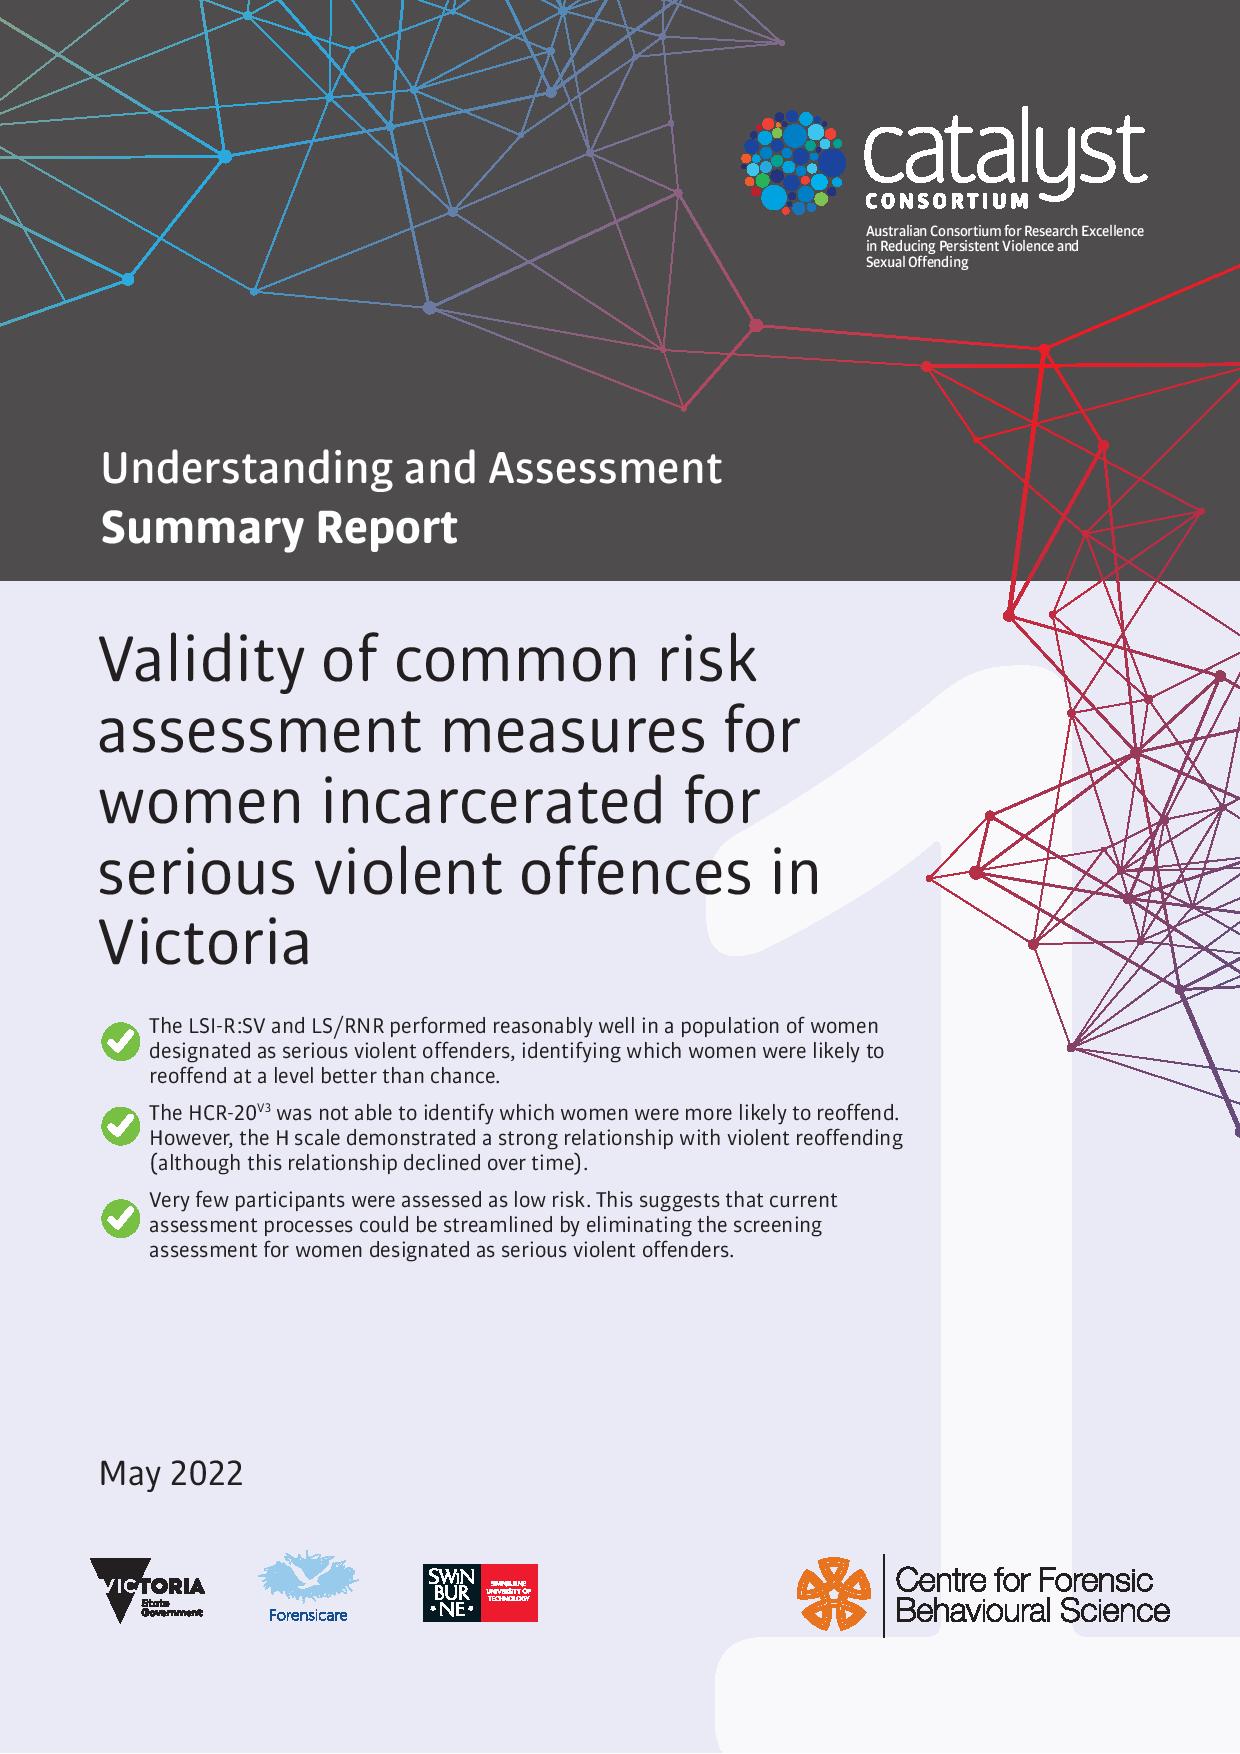 Validity of common risk assessment measures for women incarcerated for serious violent offences in Victoria